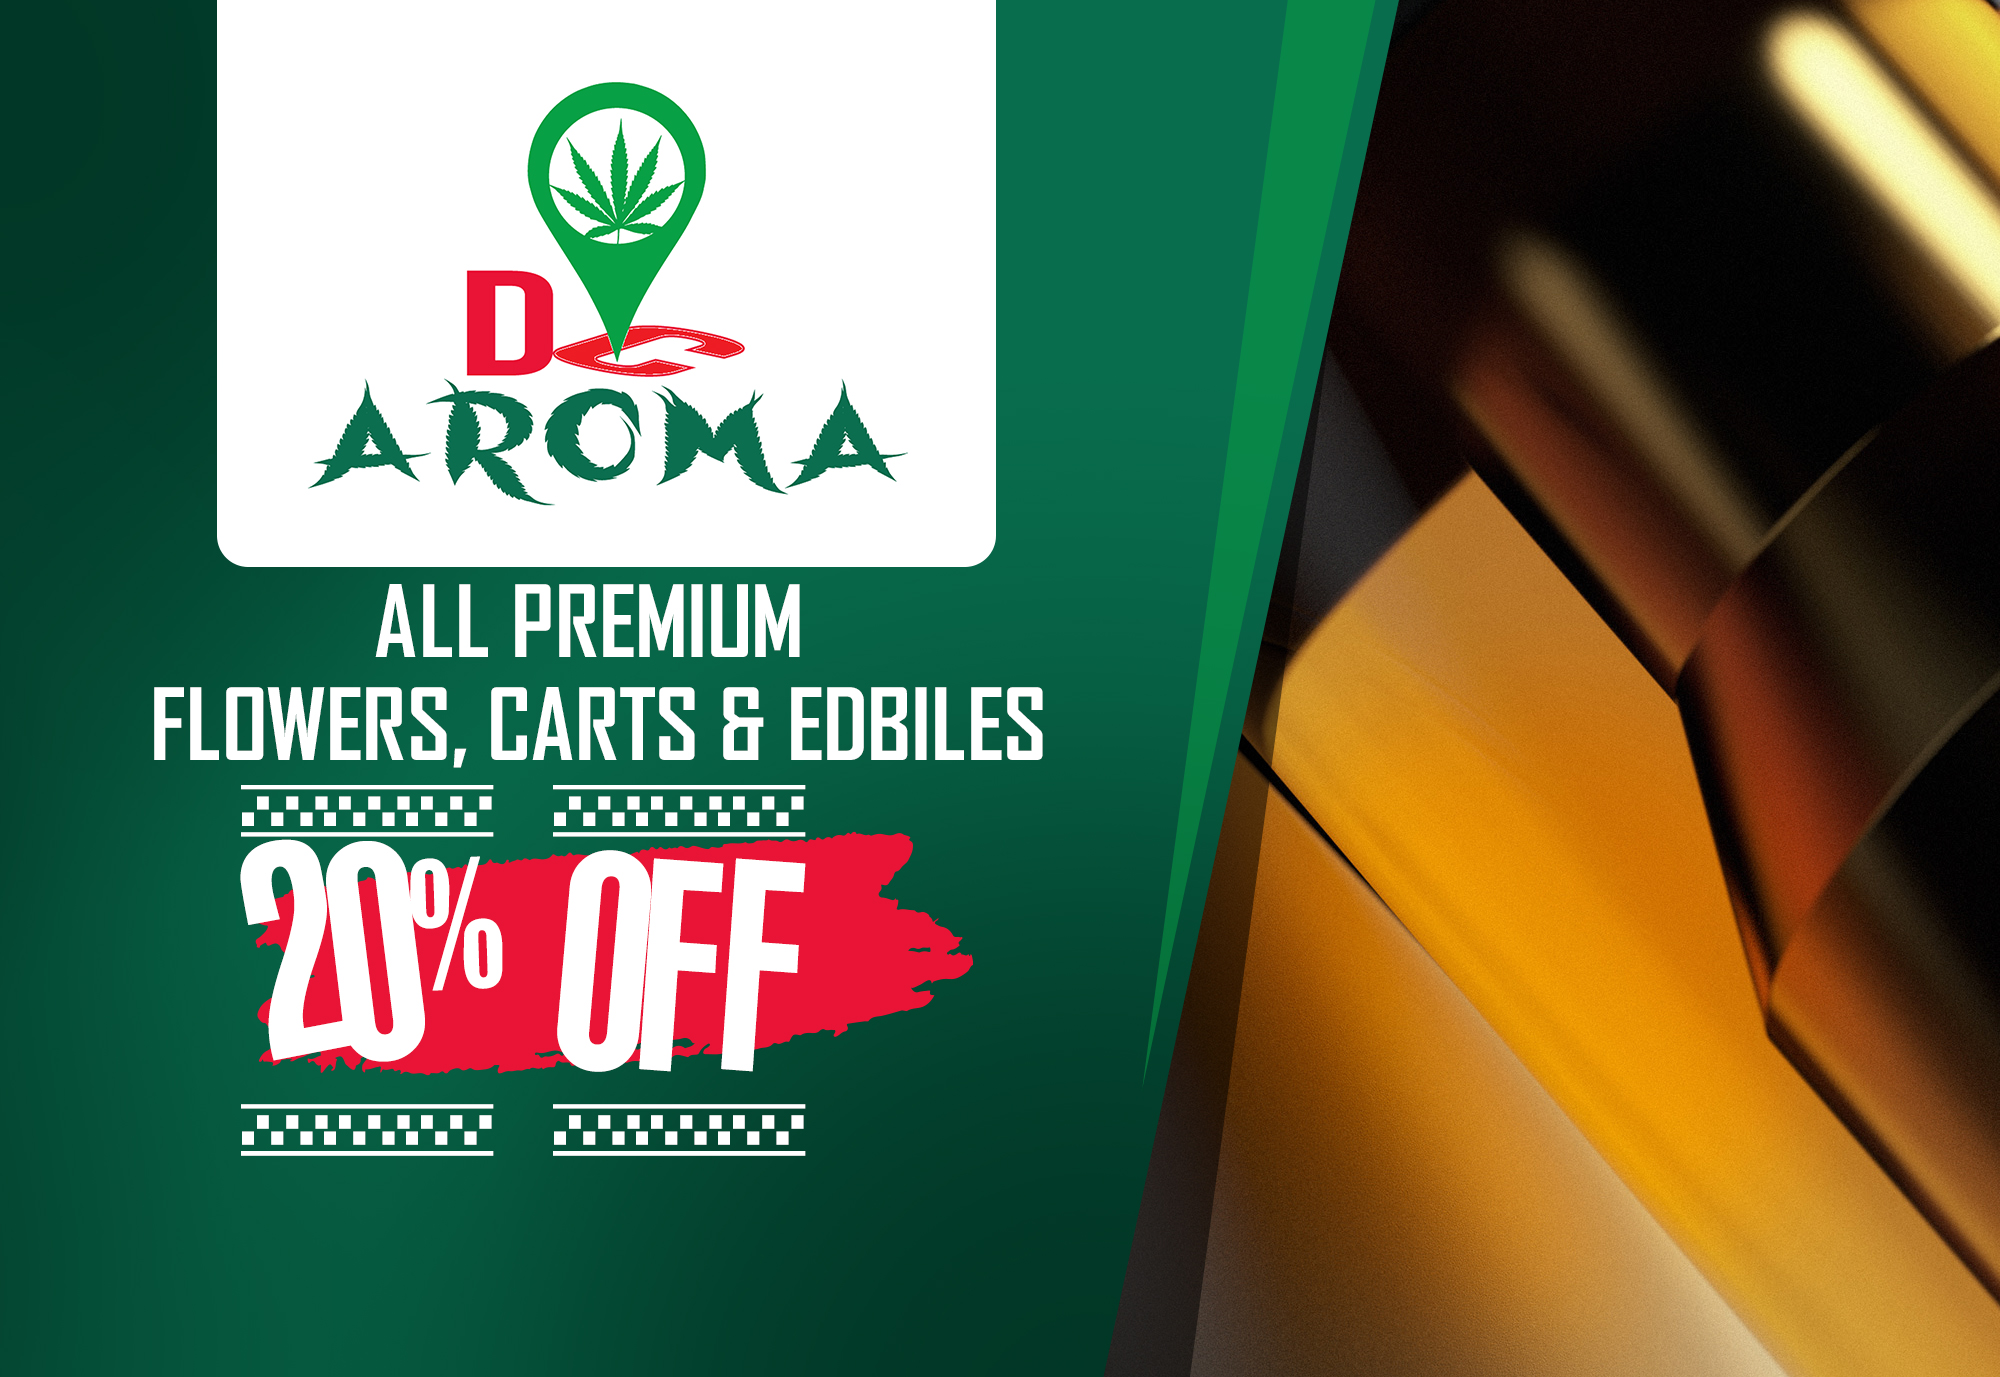 Legal & Premium Weed, Cannabis Delivery Services | Best Dispensary in Washington | DC Aroma